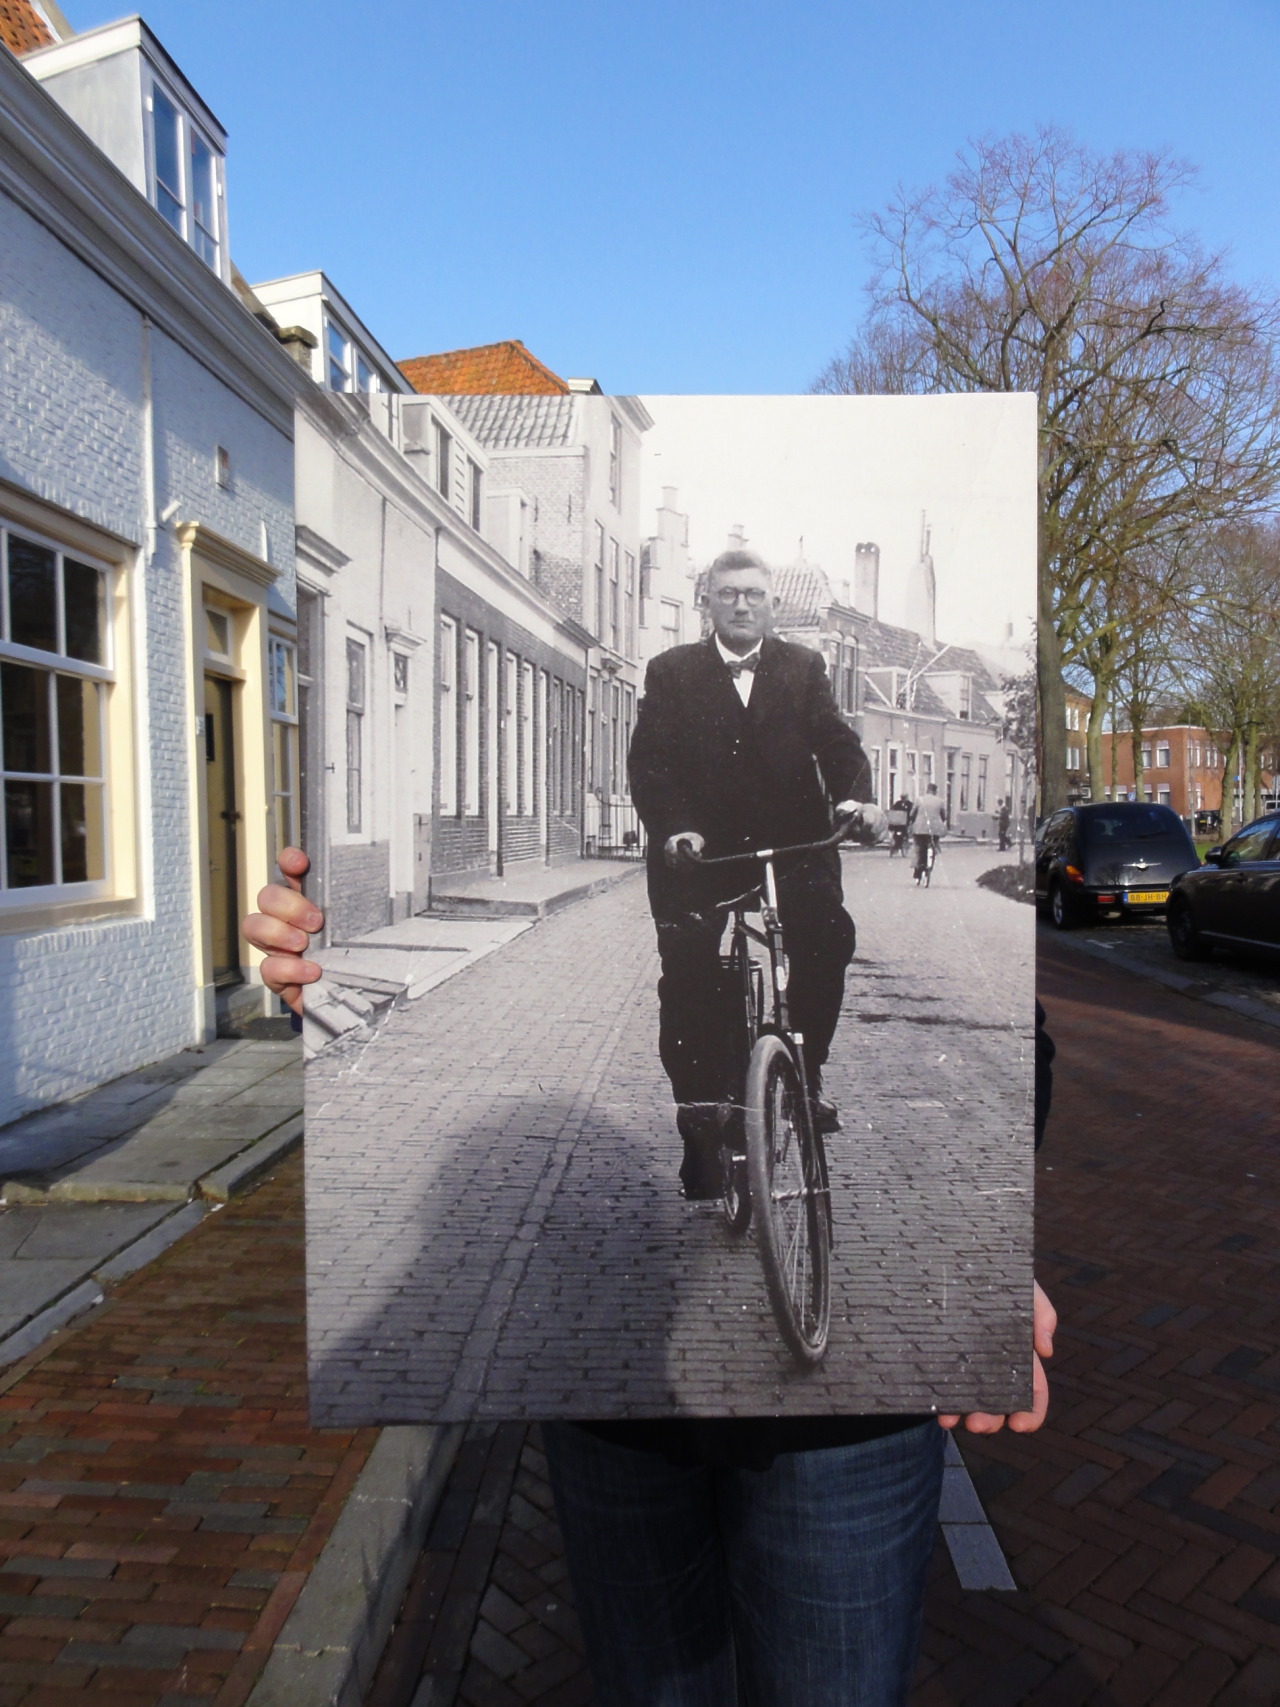 Dear Photograph, In 1935 my great-great grandfather rode through Middelburg, Netherlands and was known to all as the town butcher. Today, when the elderly ladies see this photo hanging on the lunchroom wall, they talk of how he would give them a...